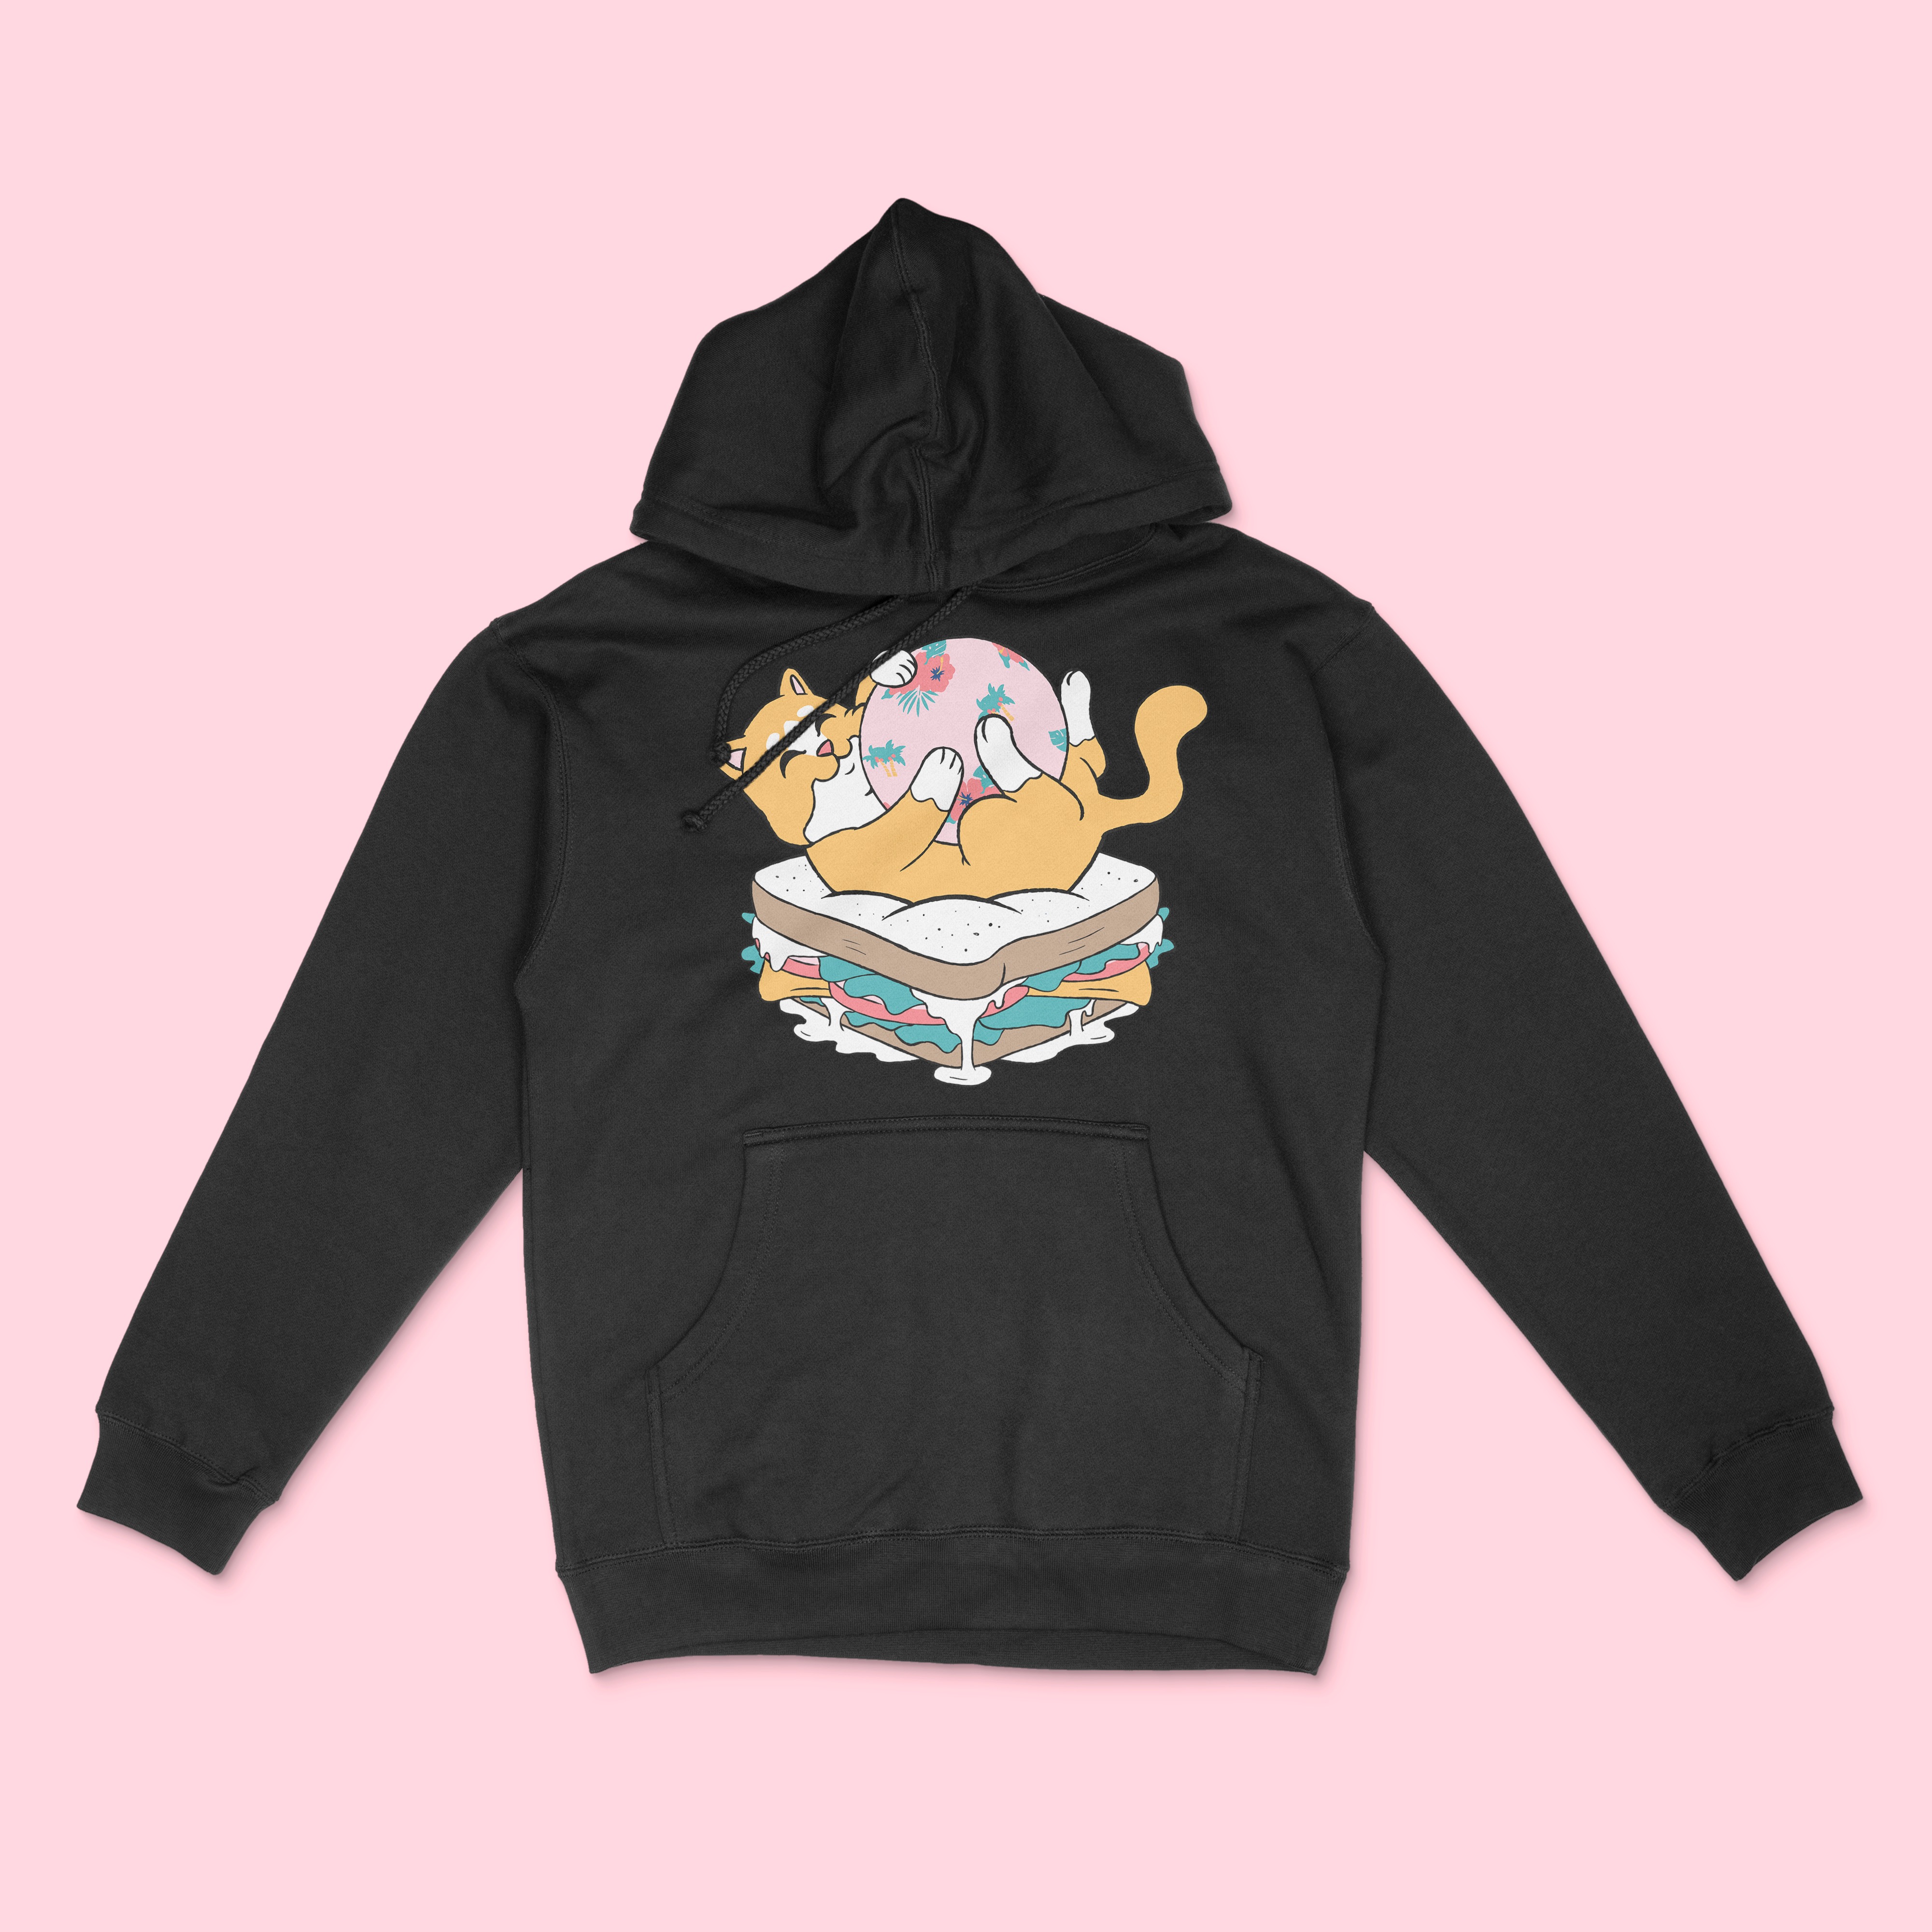 P*SSY SANDWICH Hoodie - Excuse Me What